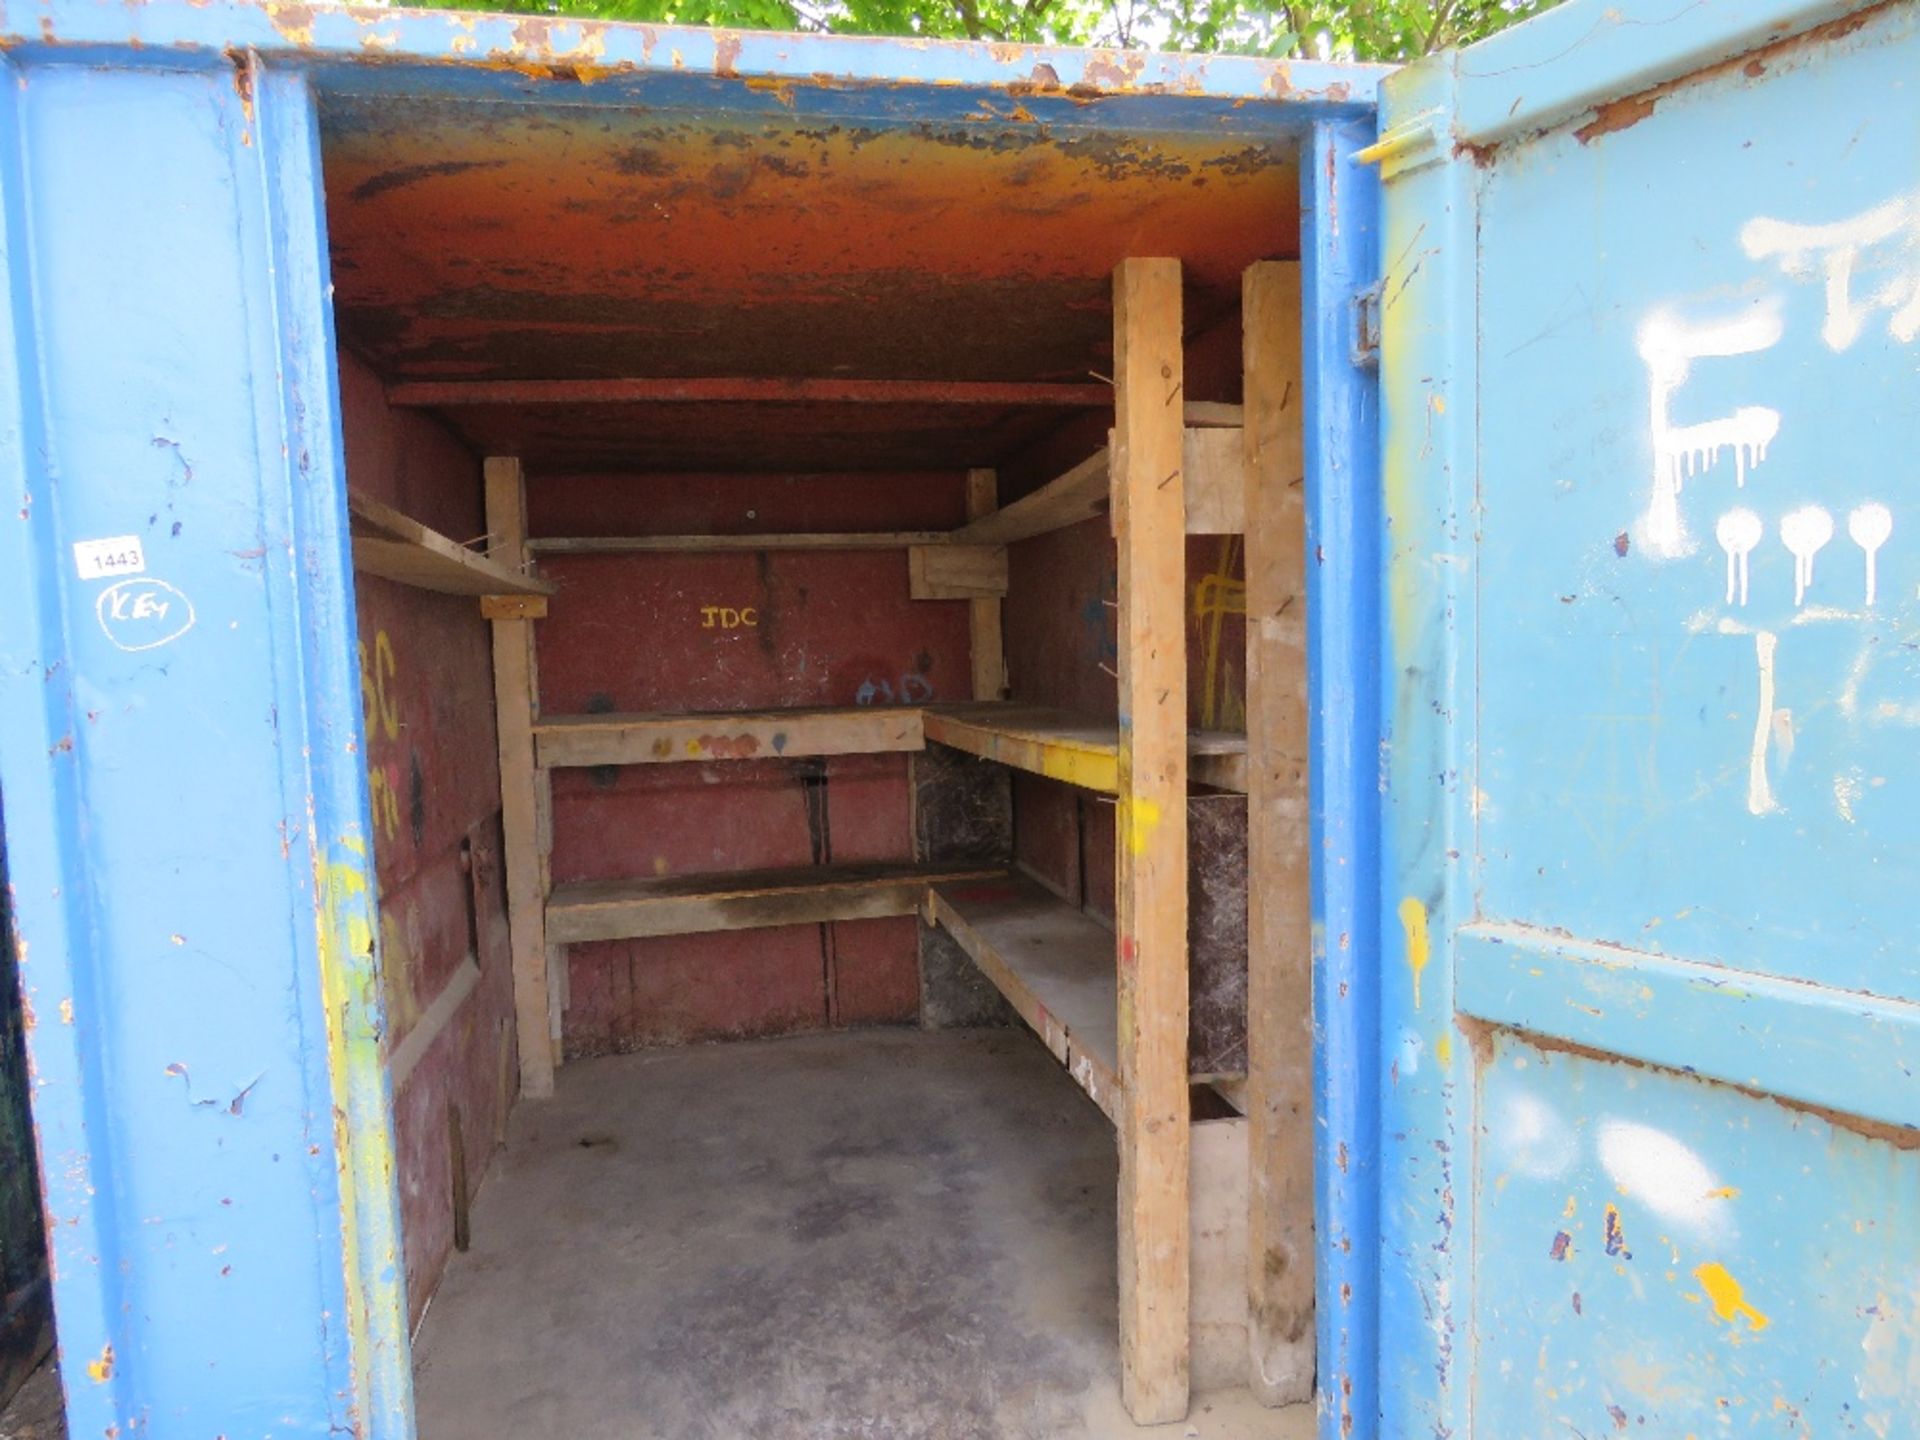 CHAIN LIFT SKIP TYPE ENCLOSED STORAGE CONTAINER 6FT WIDE X 10FT LENGTH APPROX WITH KEY. TS13. - Image 4 of 5